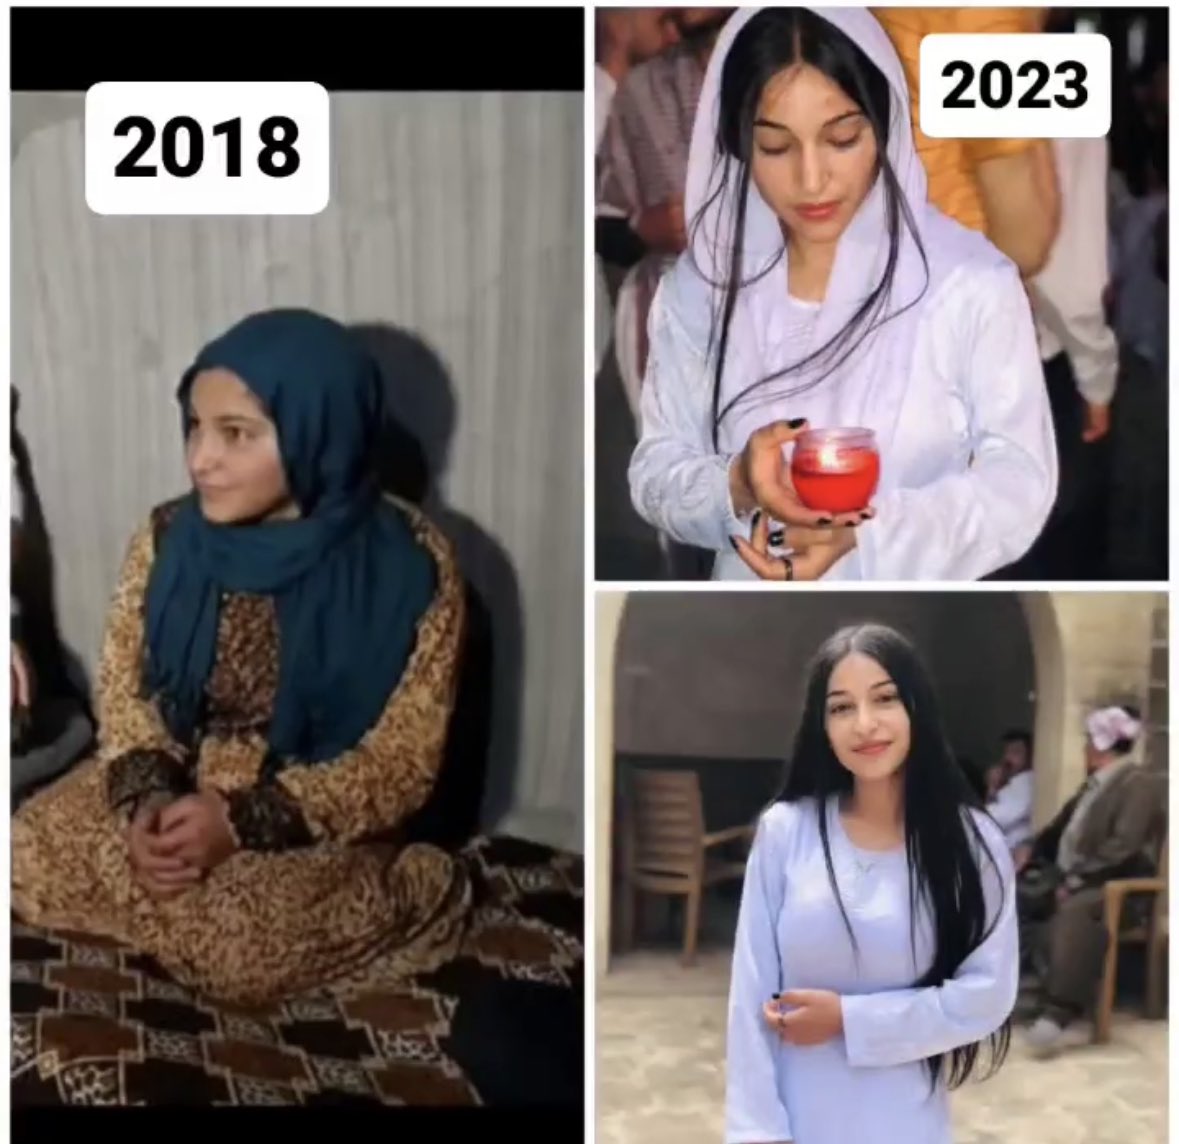 Faiza was 2018 in IS captivity.
Faiza was freed from IS captivity in 2020
Faiza is celebrating the Yezidi new year yesterday at the Lalish temple 2023
Happy #CarsemaSareSale